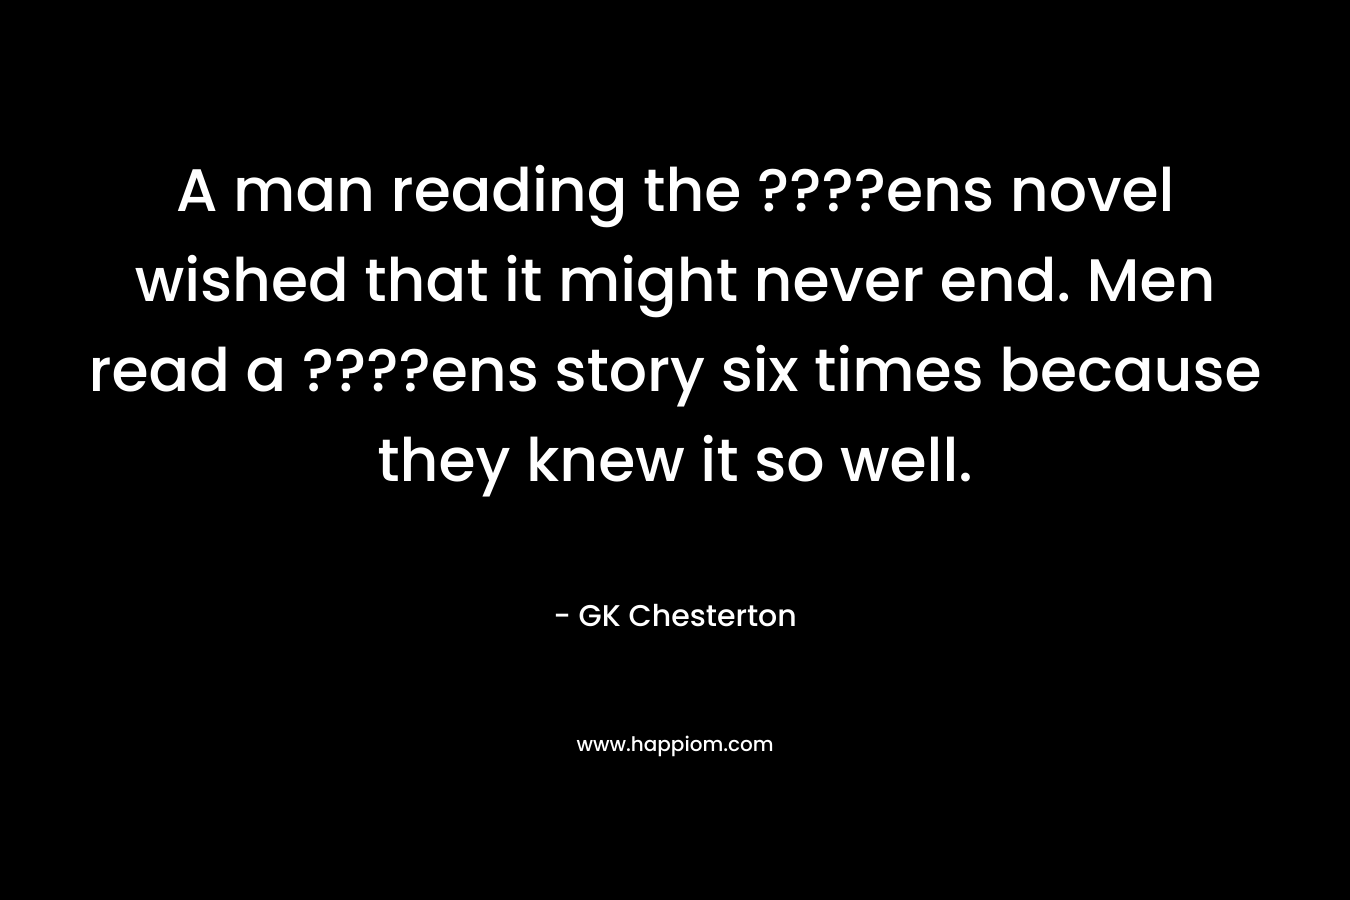 A man reading the ????ens novel wished that it might never end. Men read a ????ens story six times because they knew it so well.